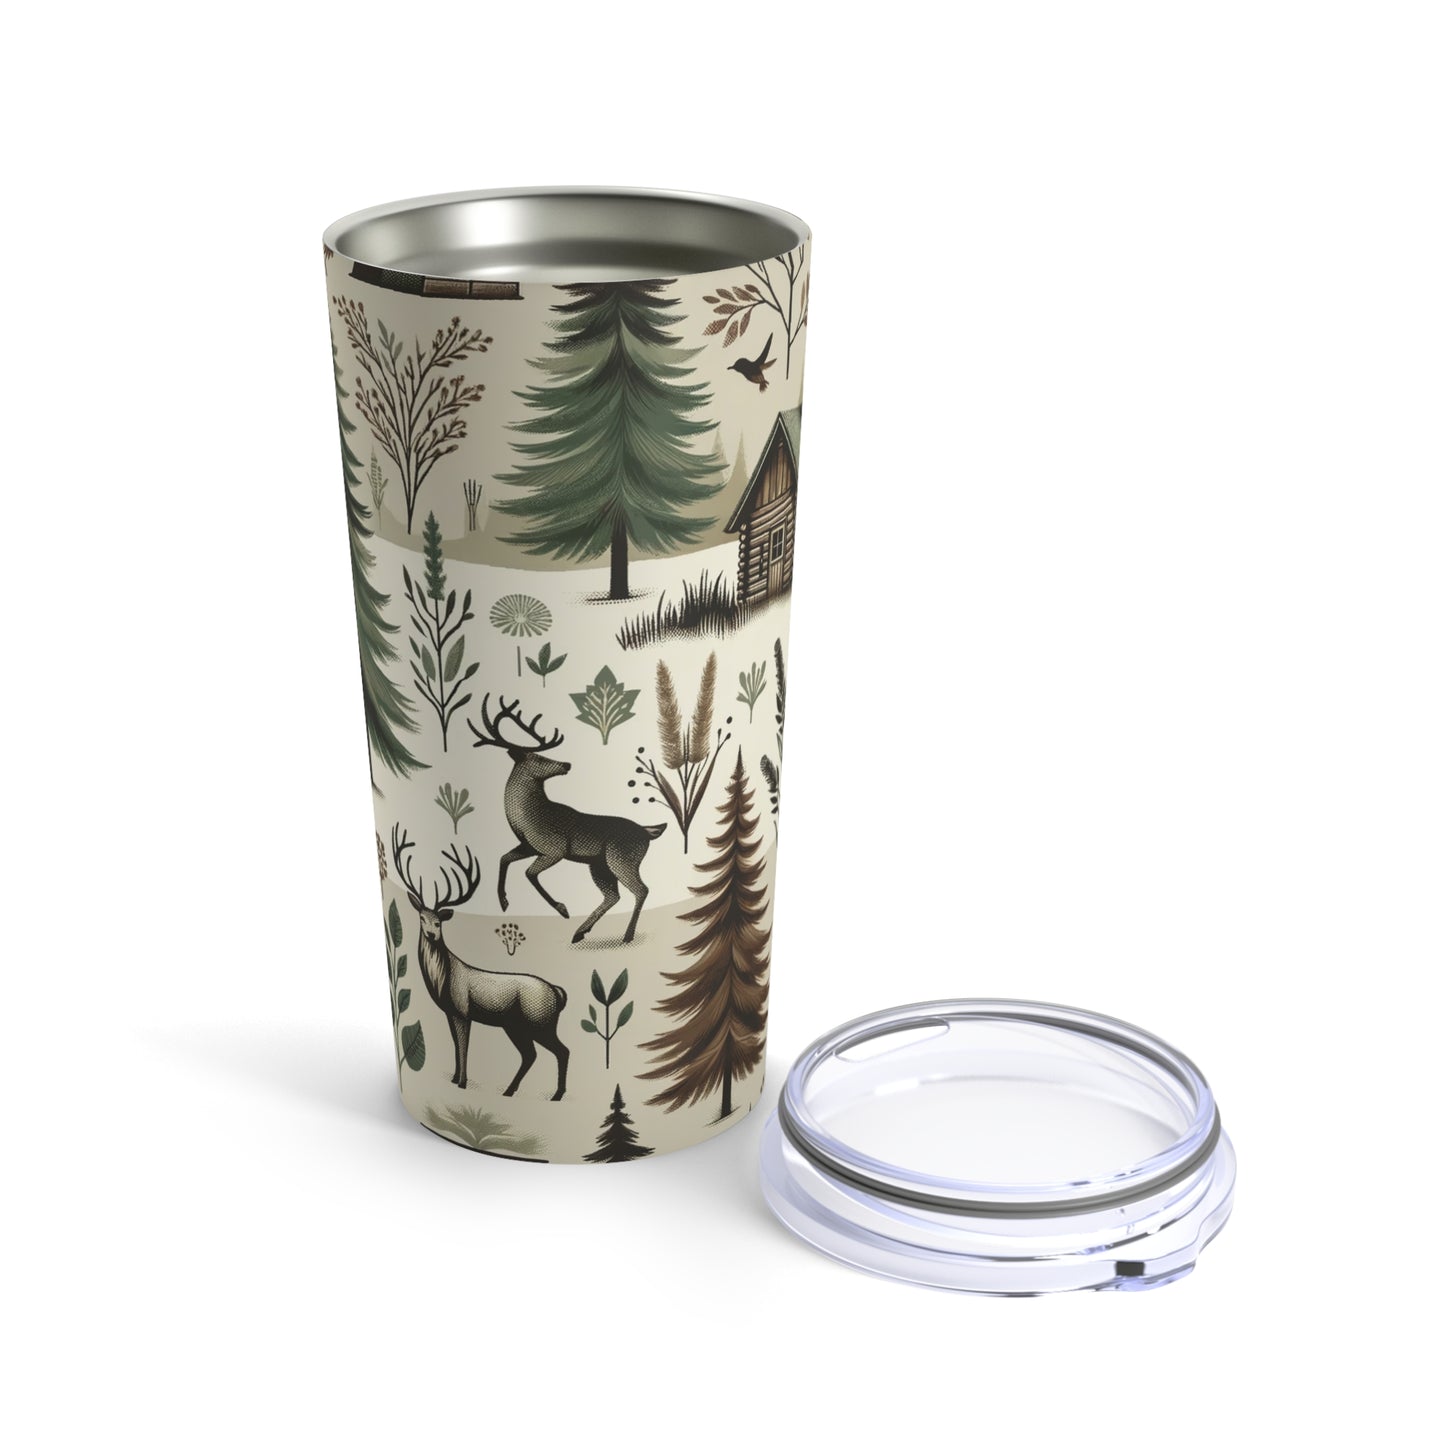 Rustic Woodland 20oz Tumbler - Cozy Cabin and Forest Design, Earthy Tones